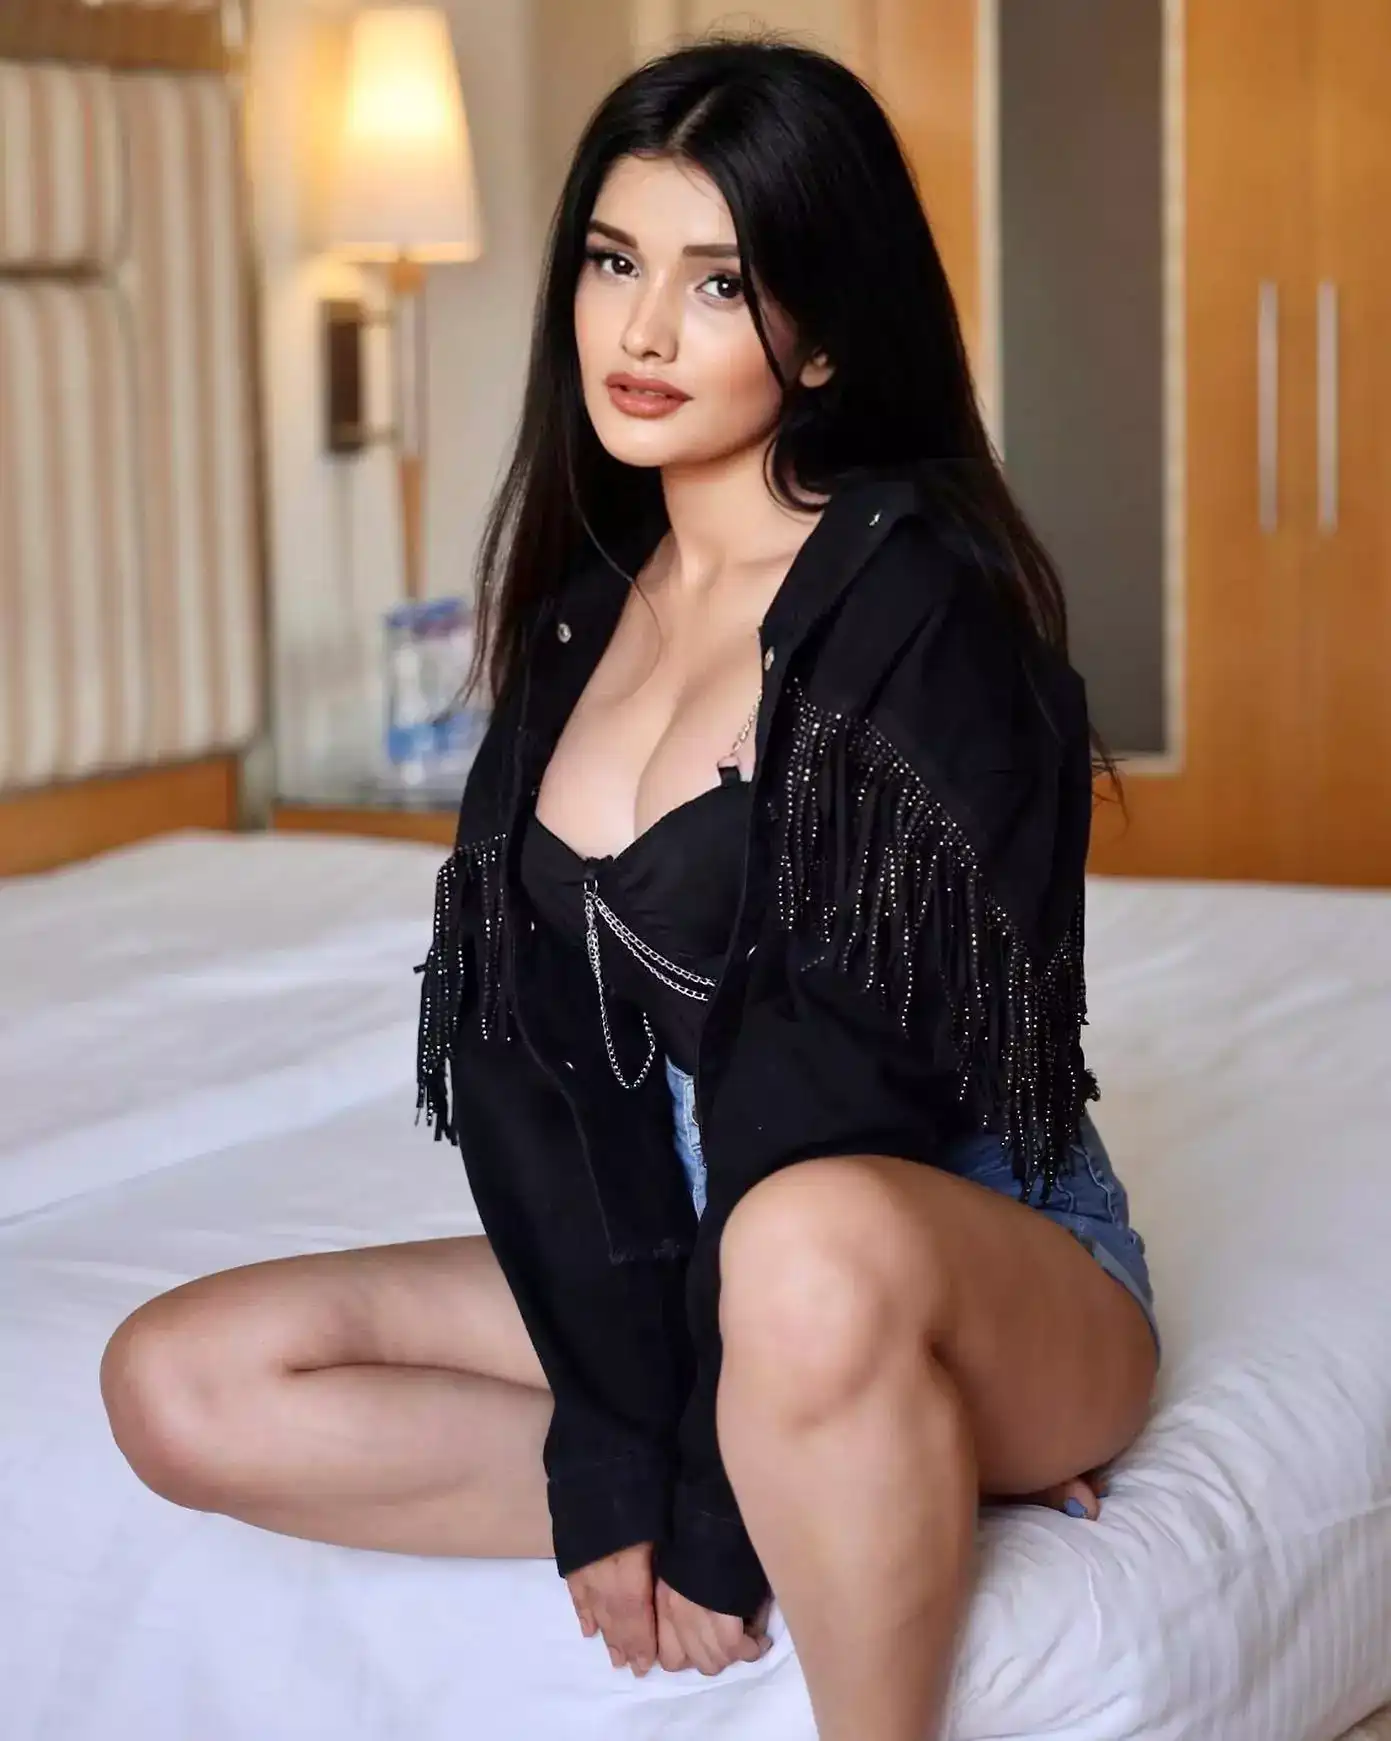 Ratna arora call girls bhandup indian rupee free offers best young pretty independent incall facility